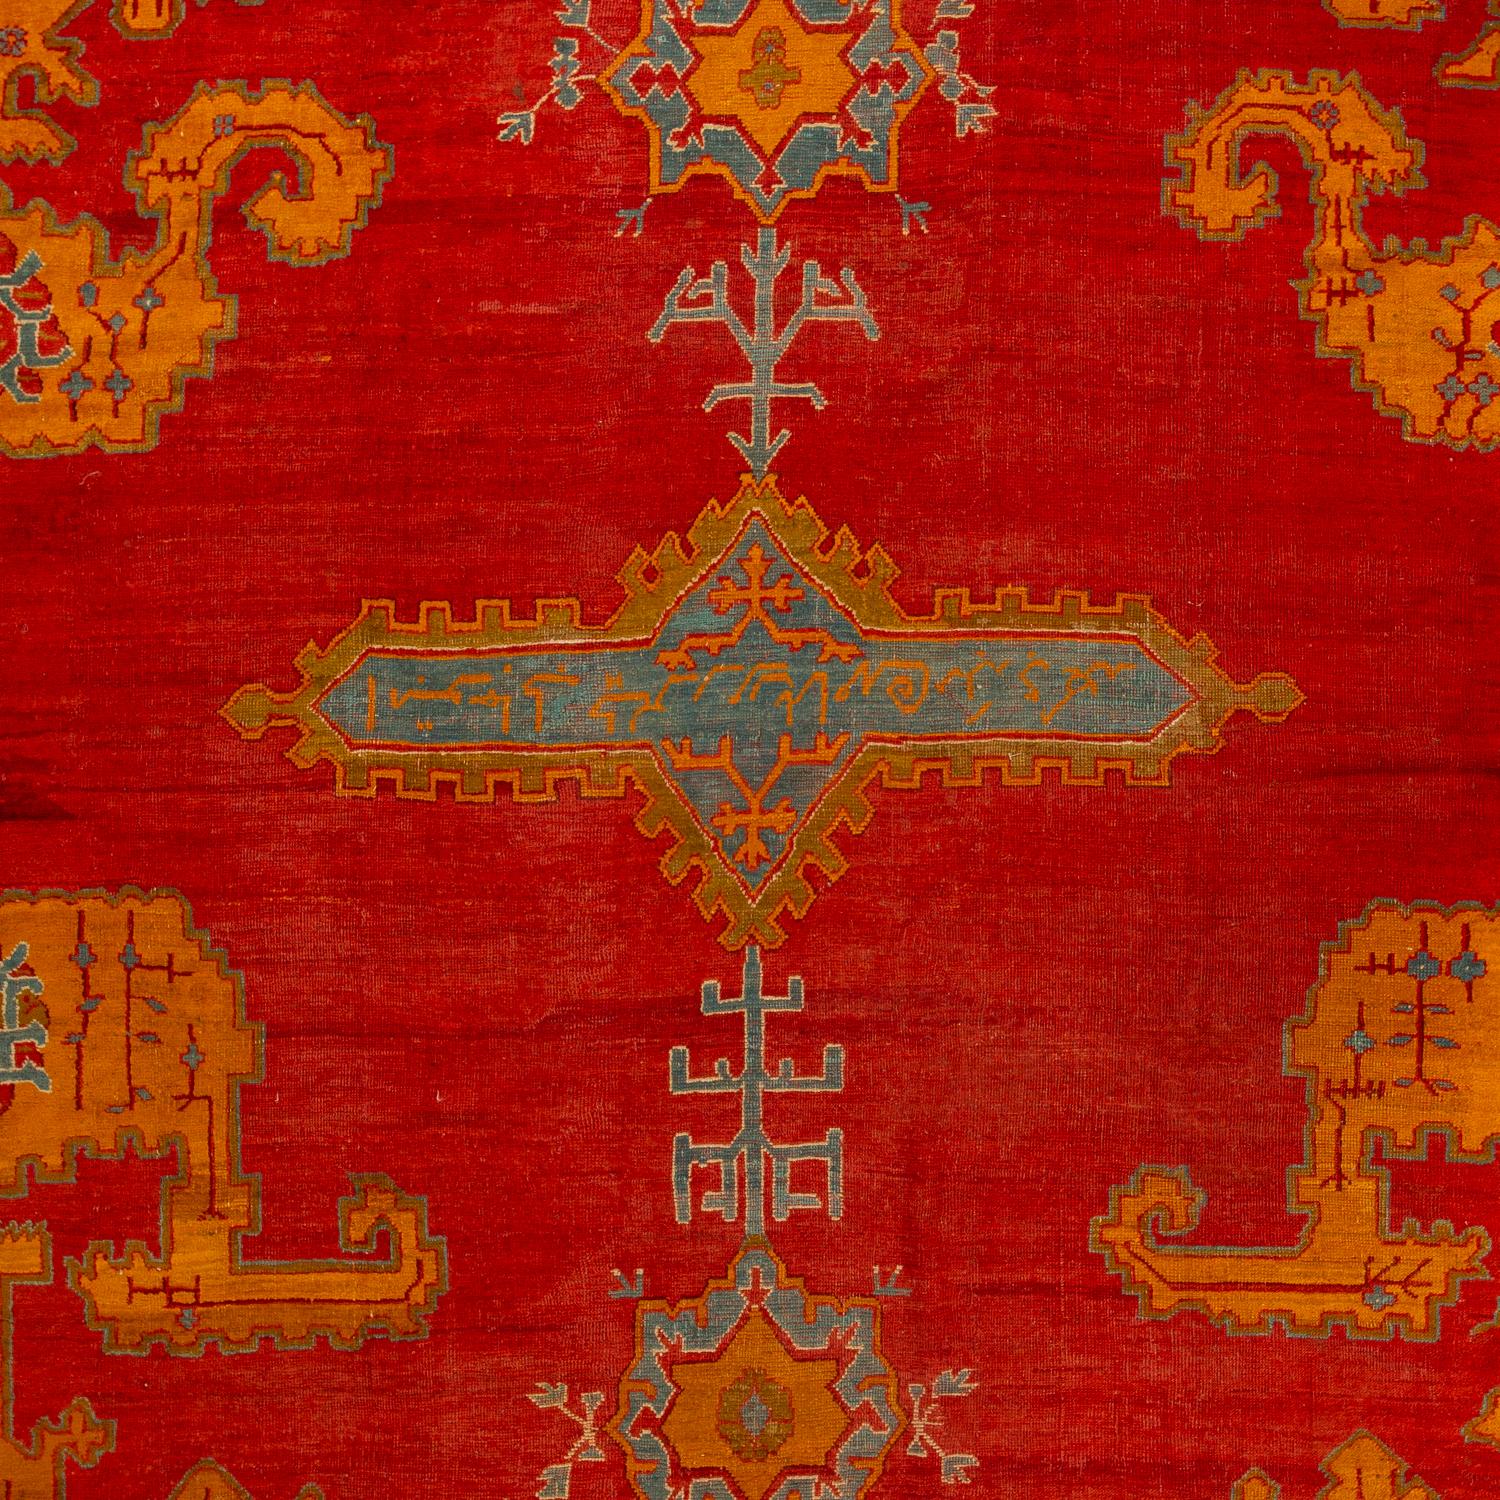 Featuring a vibrant canvas bursting with regal red hues, this traditional rug is hand-knotted in the Anatolian style of weaving, The color-work is big, bold, and powerful, providing a sense of warmth and soul that can only come from something